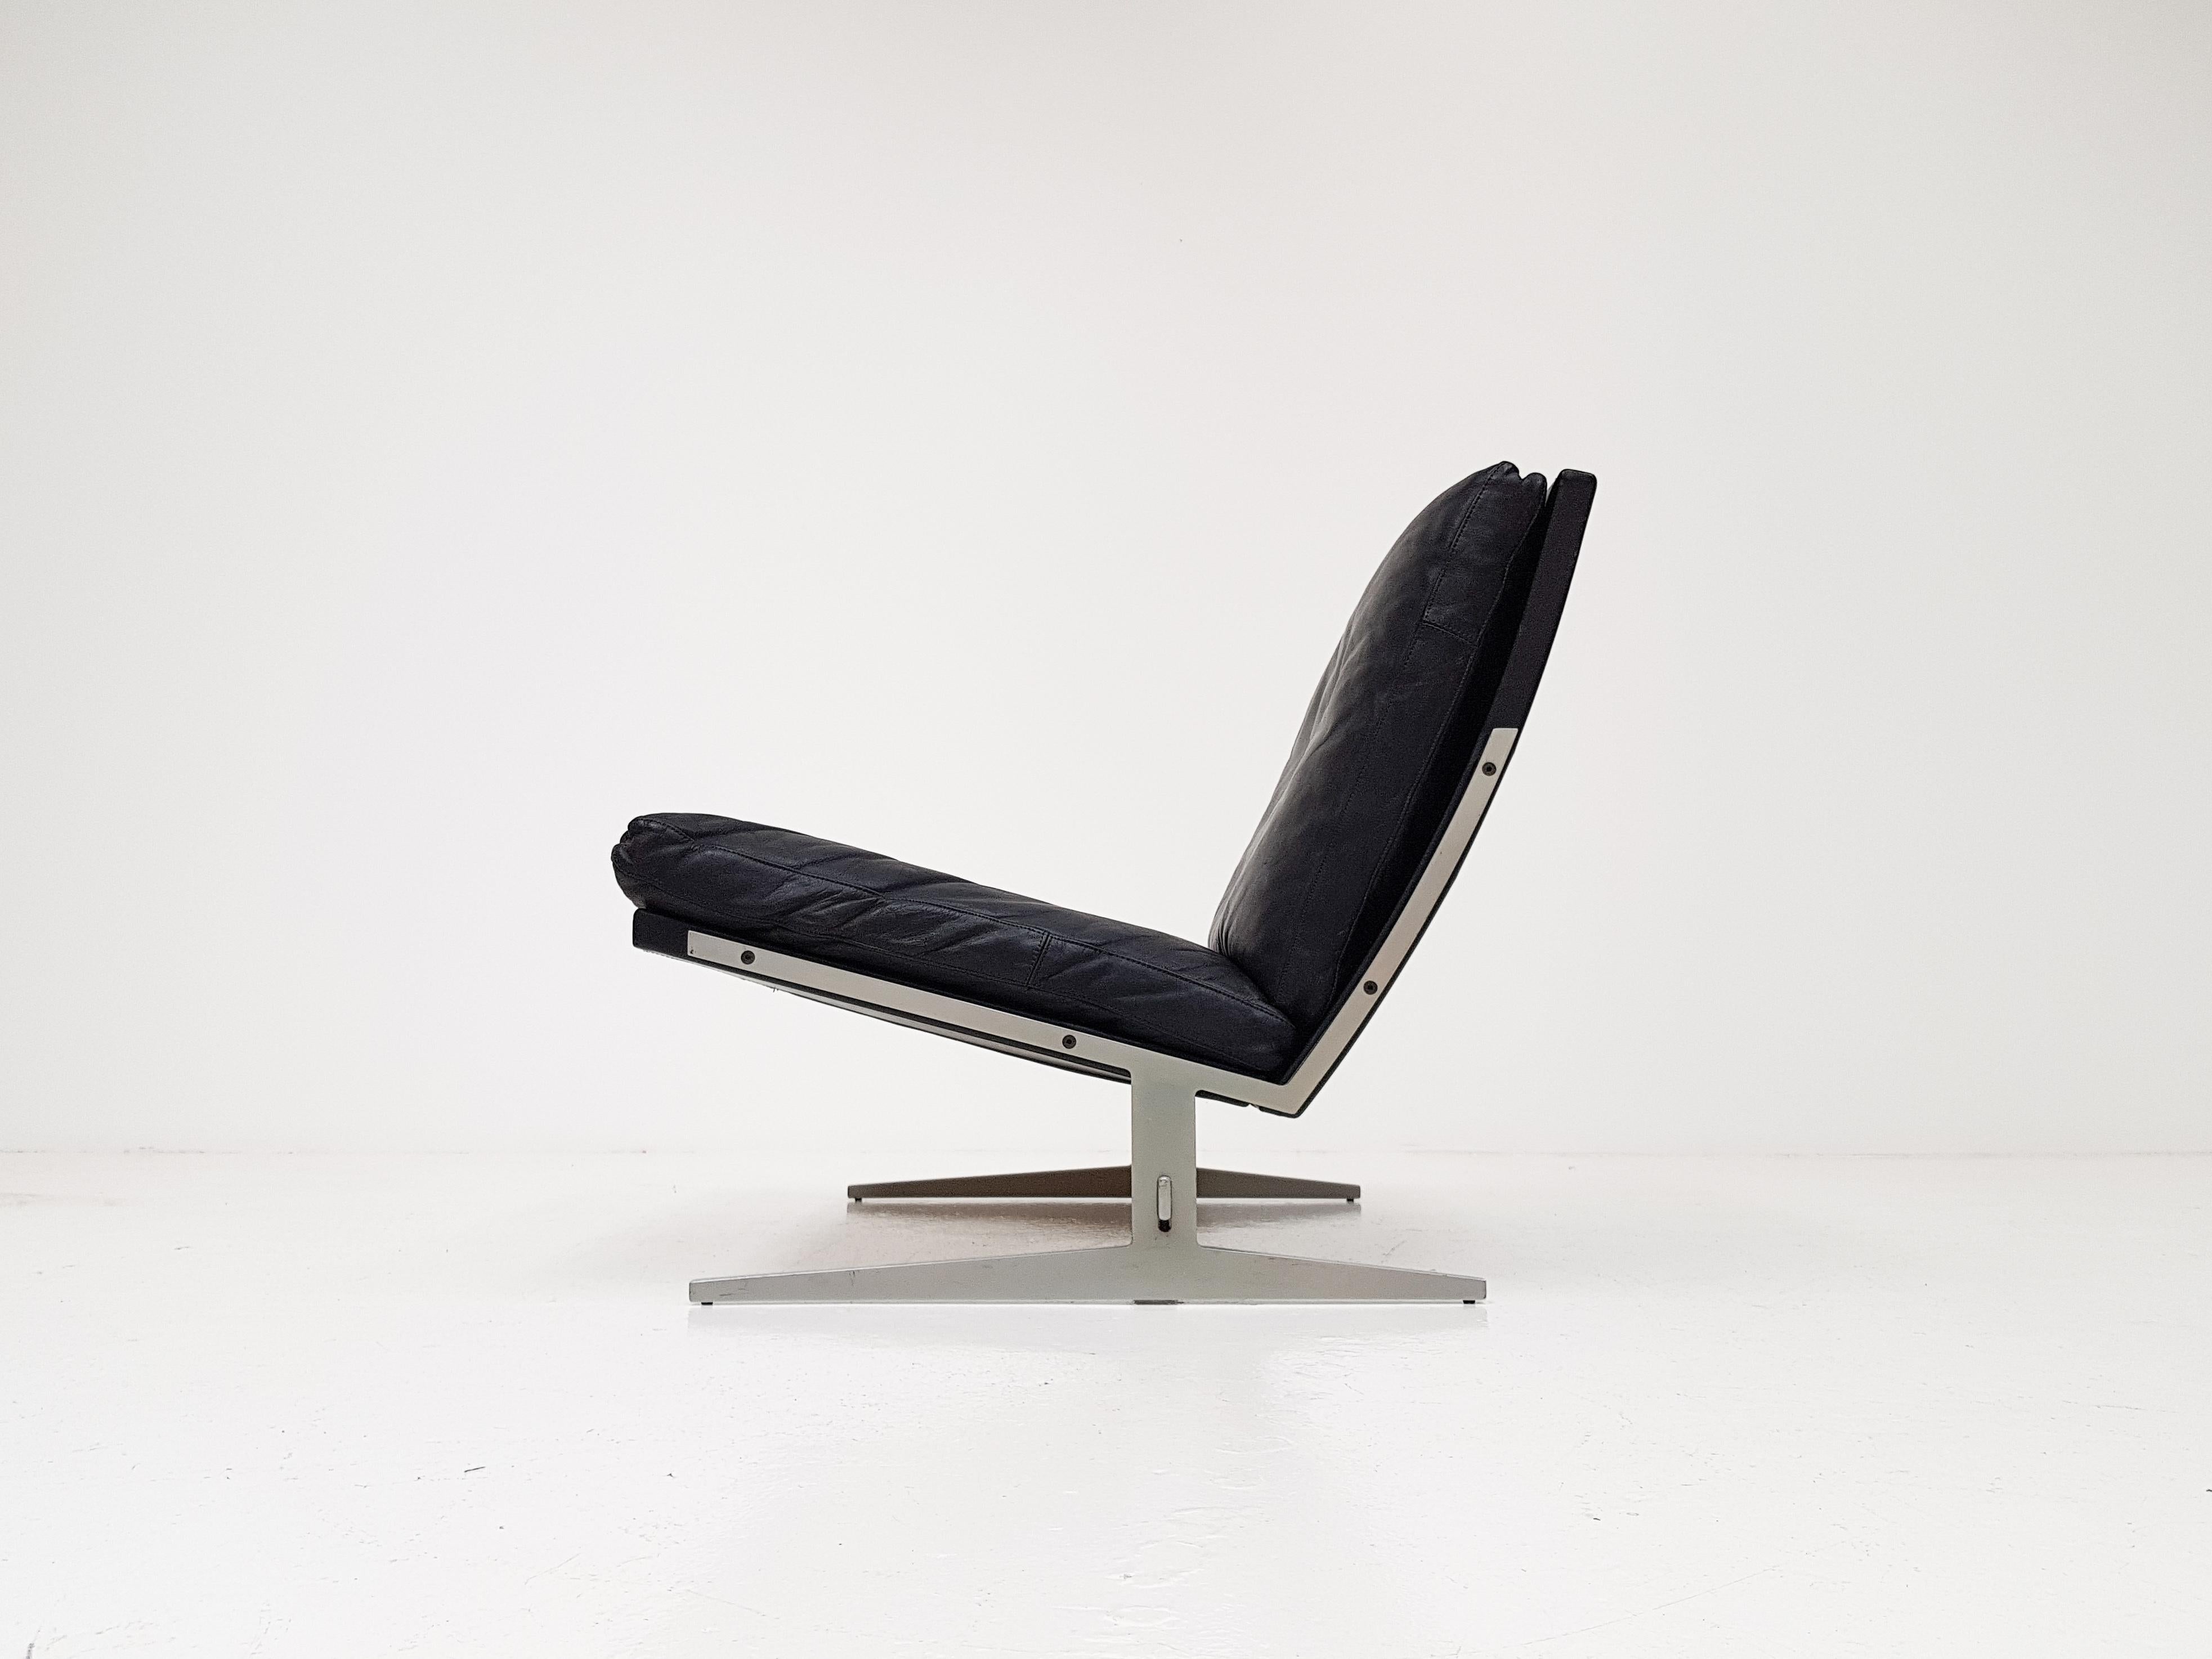 Jørgen Kastholm & Preben Fabricius Easy Chair, Model Bo-561 for Bo-Ex, Denmark, 1962

A rare model Bo-561 easy chair designed by Jørgen Kastholm & Preben Fabricius. Produced by Bo-Ex in Denmark.

This piece has its original black leather with